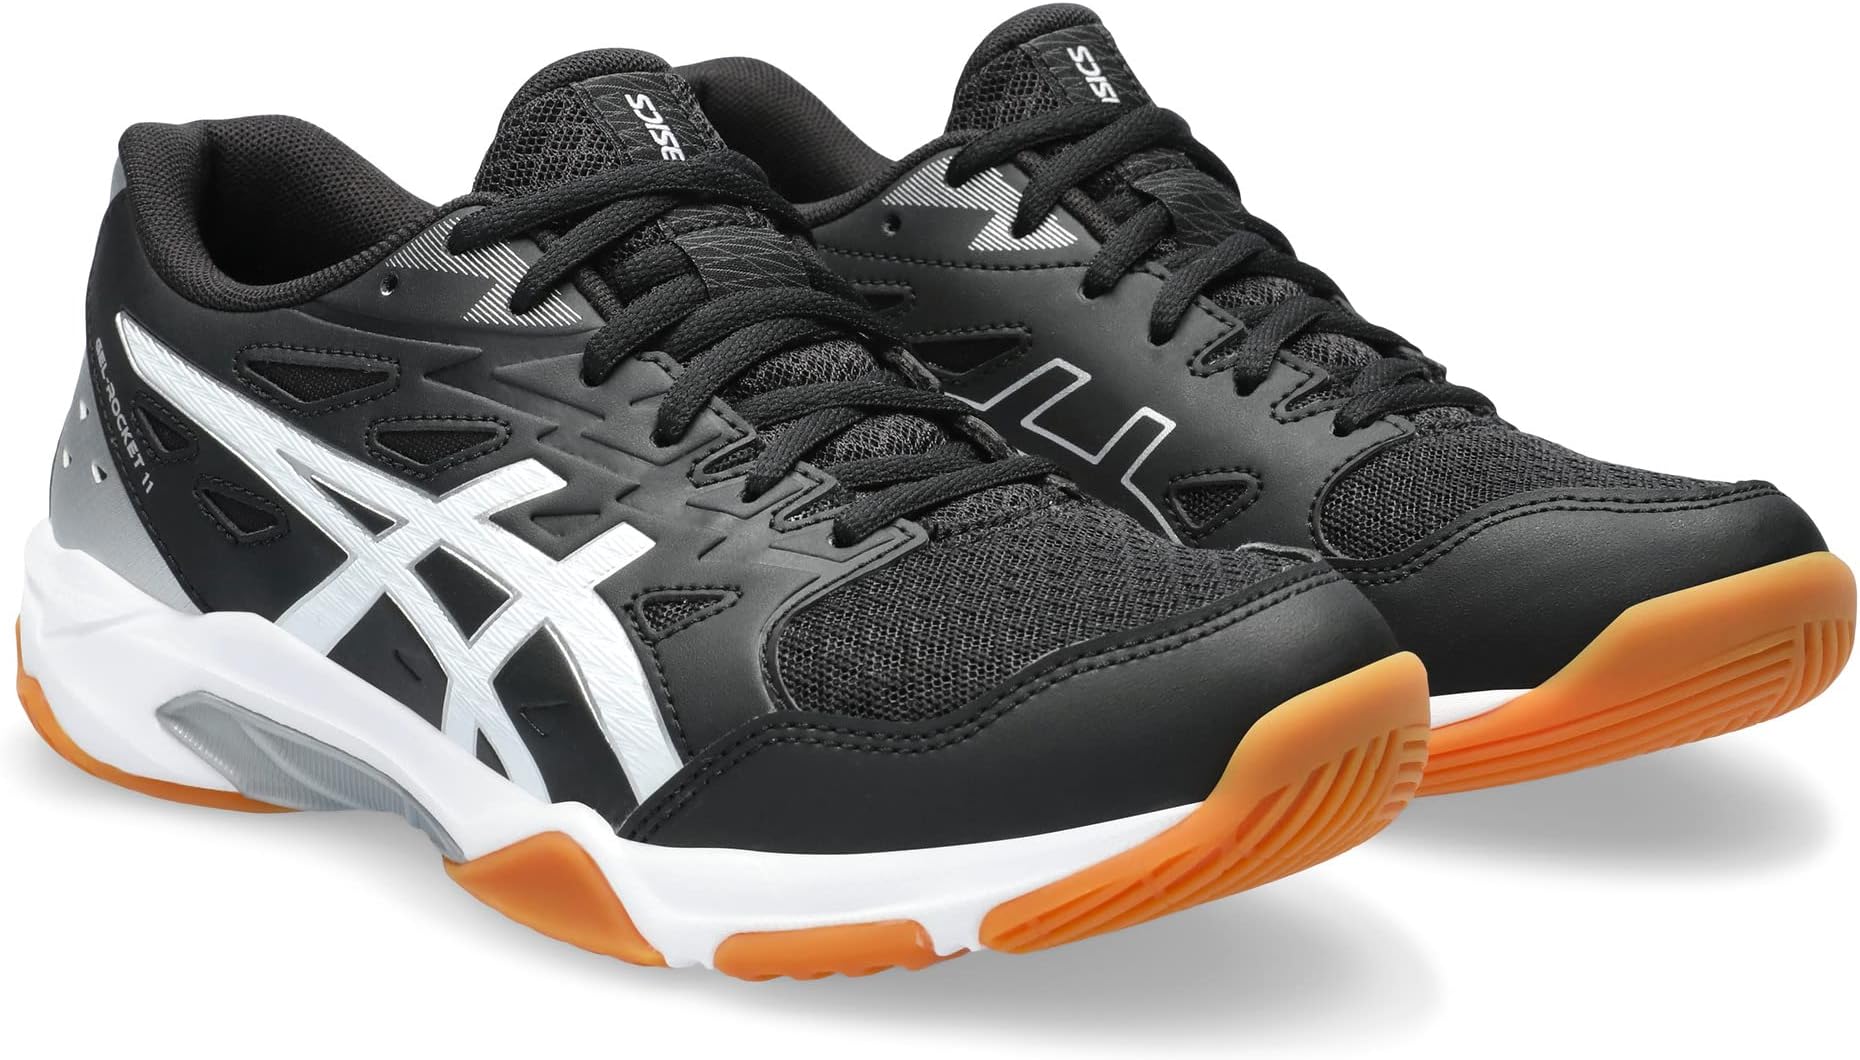 Кроссовки GEL-Rocket 11 Volleyball Shoe ASICS, цвет Black/Pure Silver kjjeaxcmy boutique jewelryar s925 pure silver retro personality boxing trend